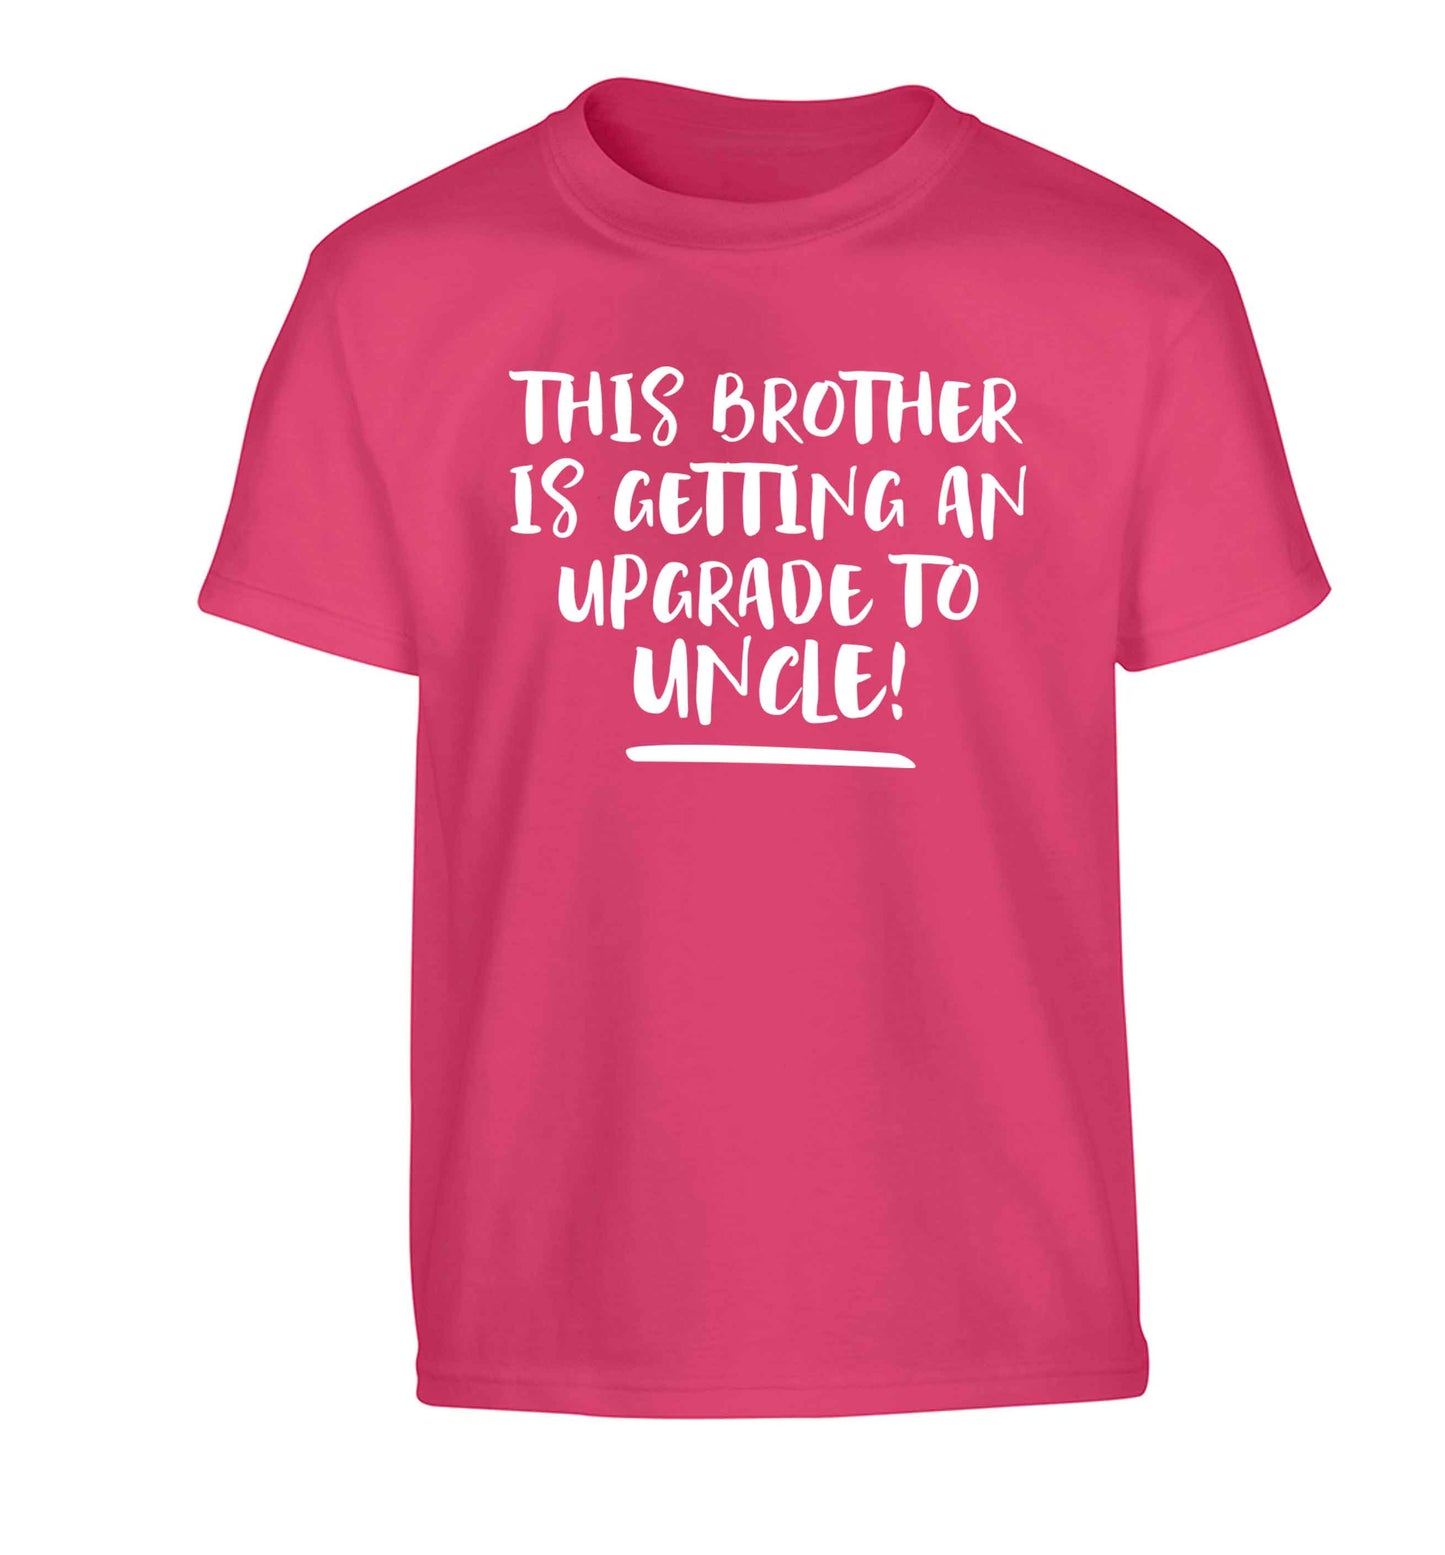 This brother is getting an upgrade to uncle! Children's pink Tshirt 12-13 Years